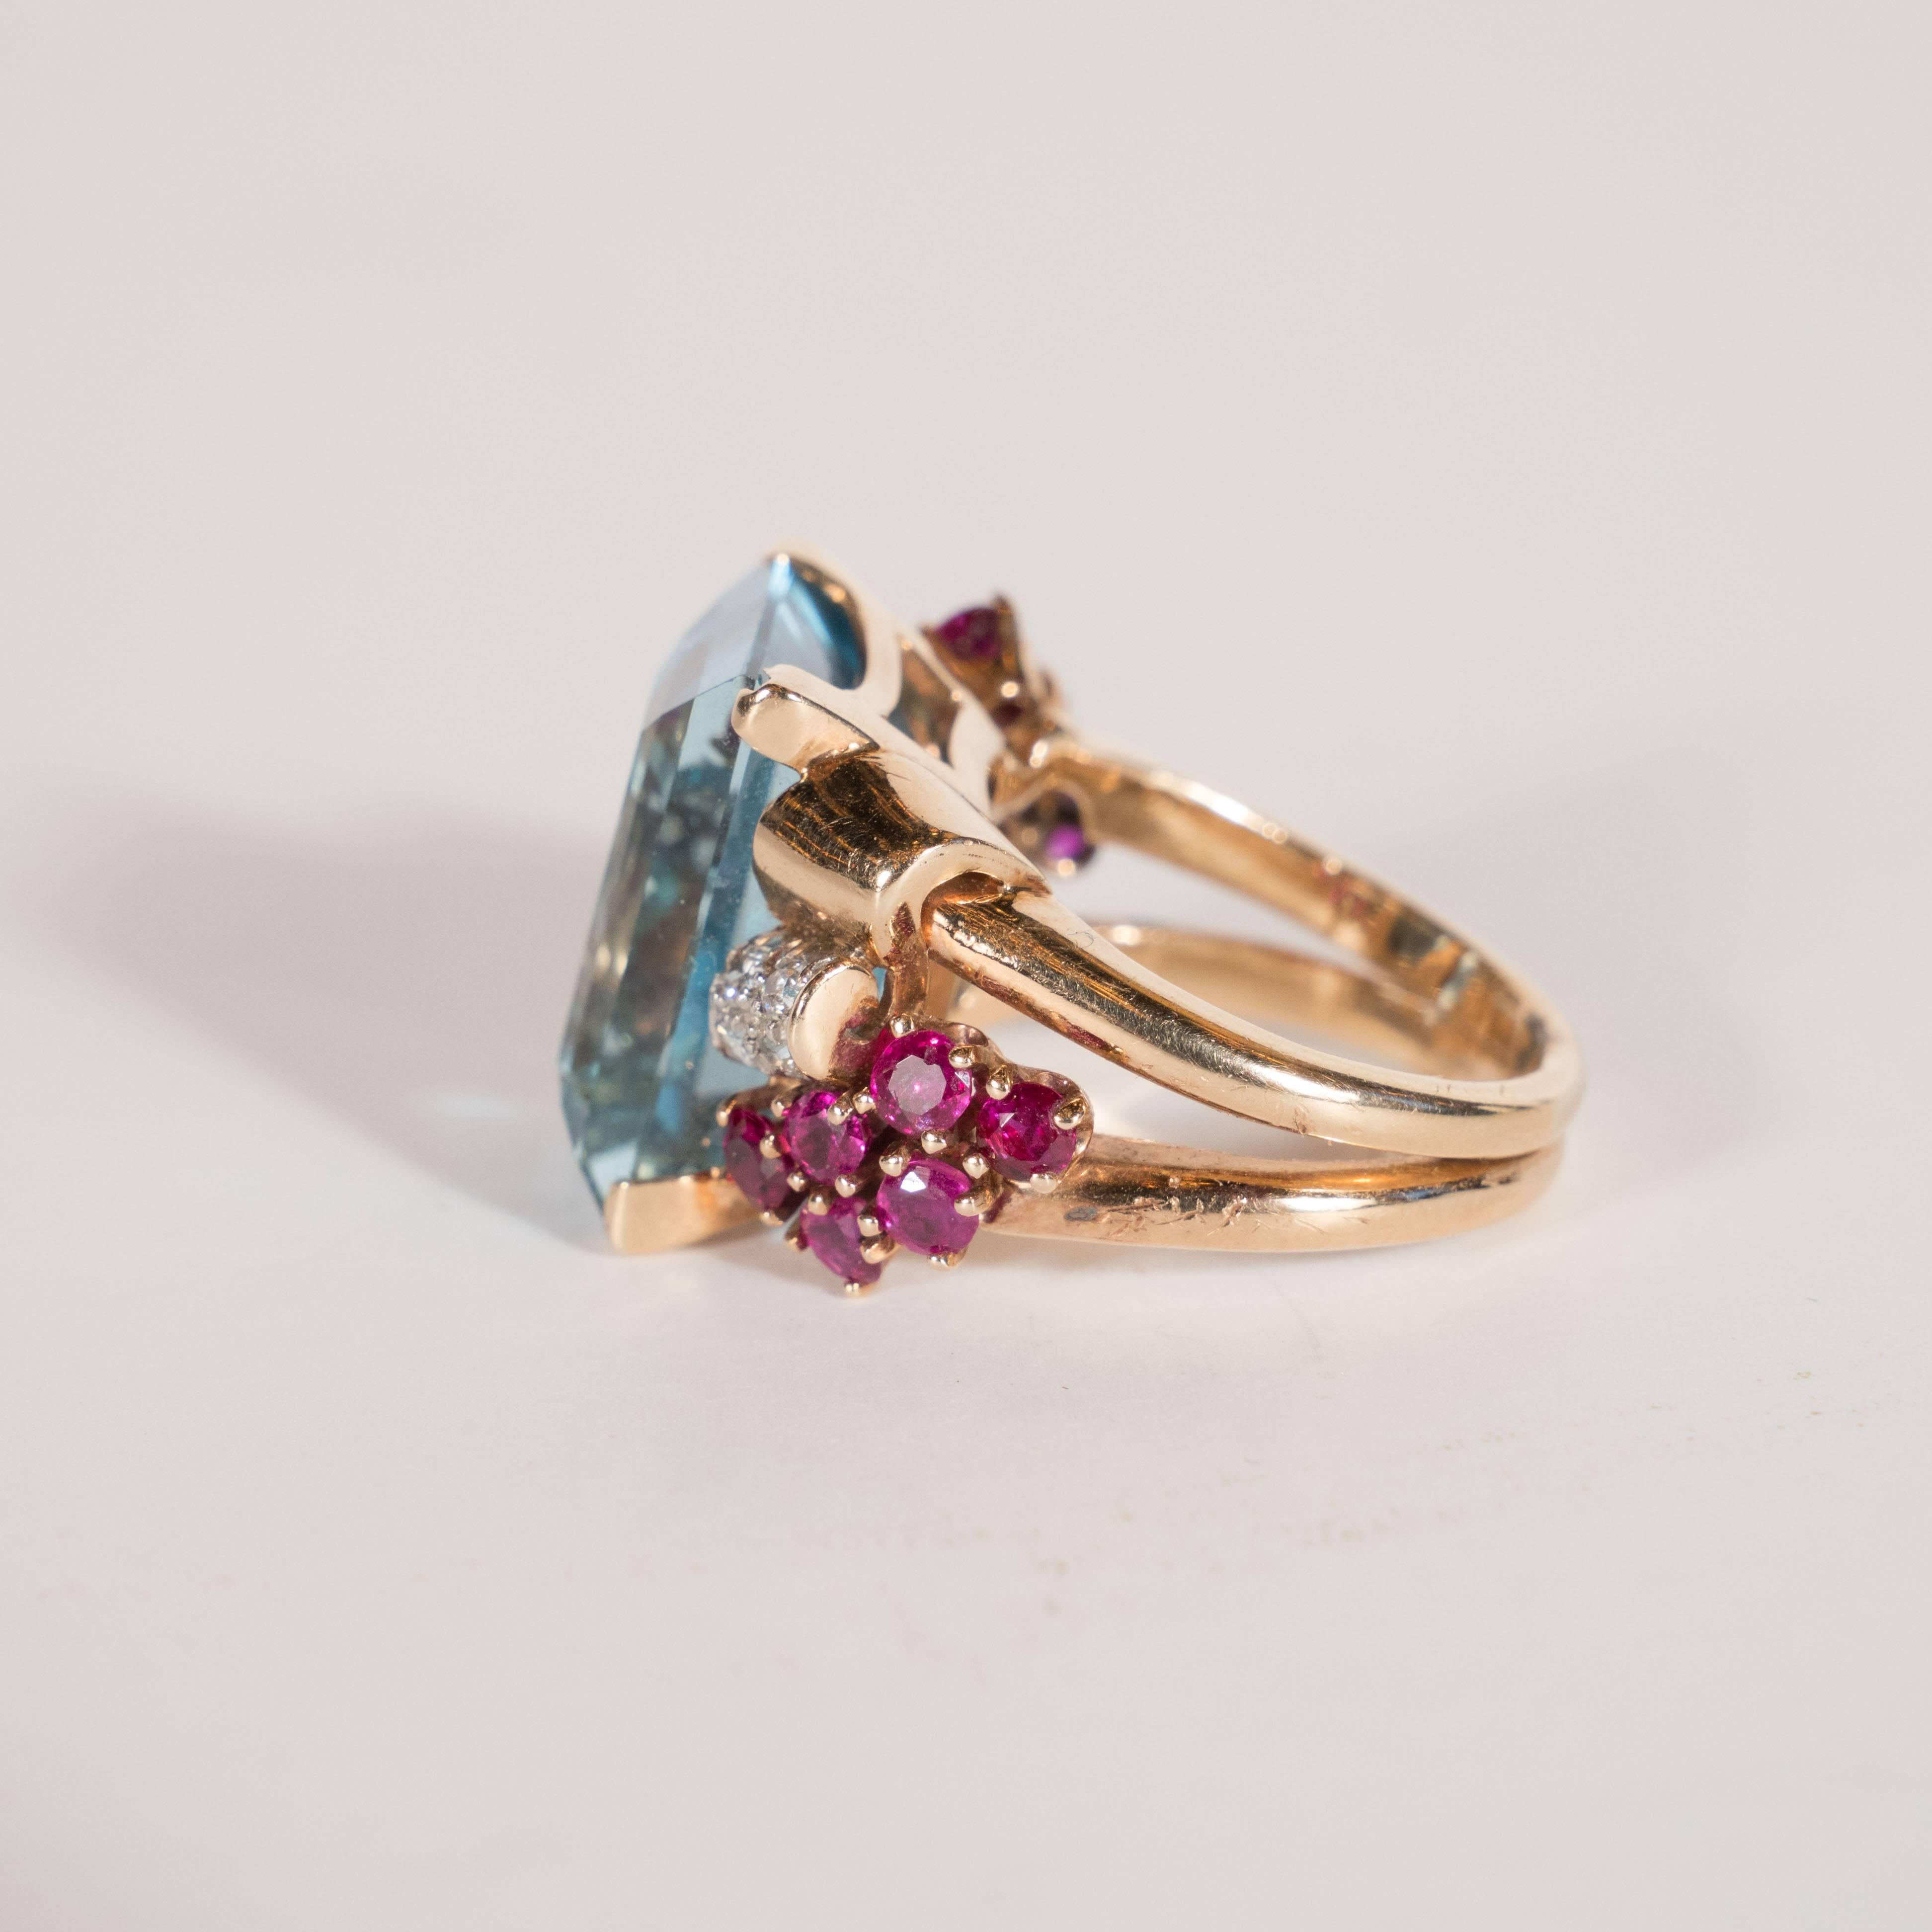 Retro 1940s American 8 Carat Acquamarine and 14k Gold Ring with Rubies and Diamonds